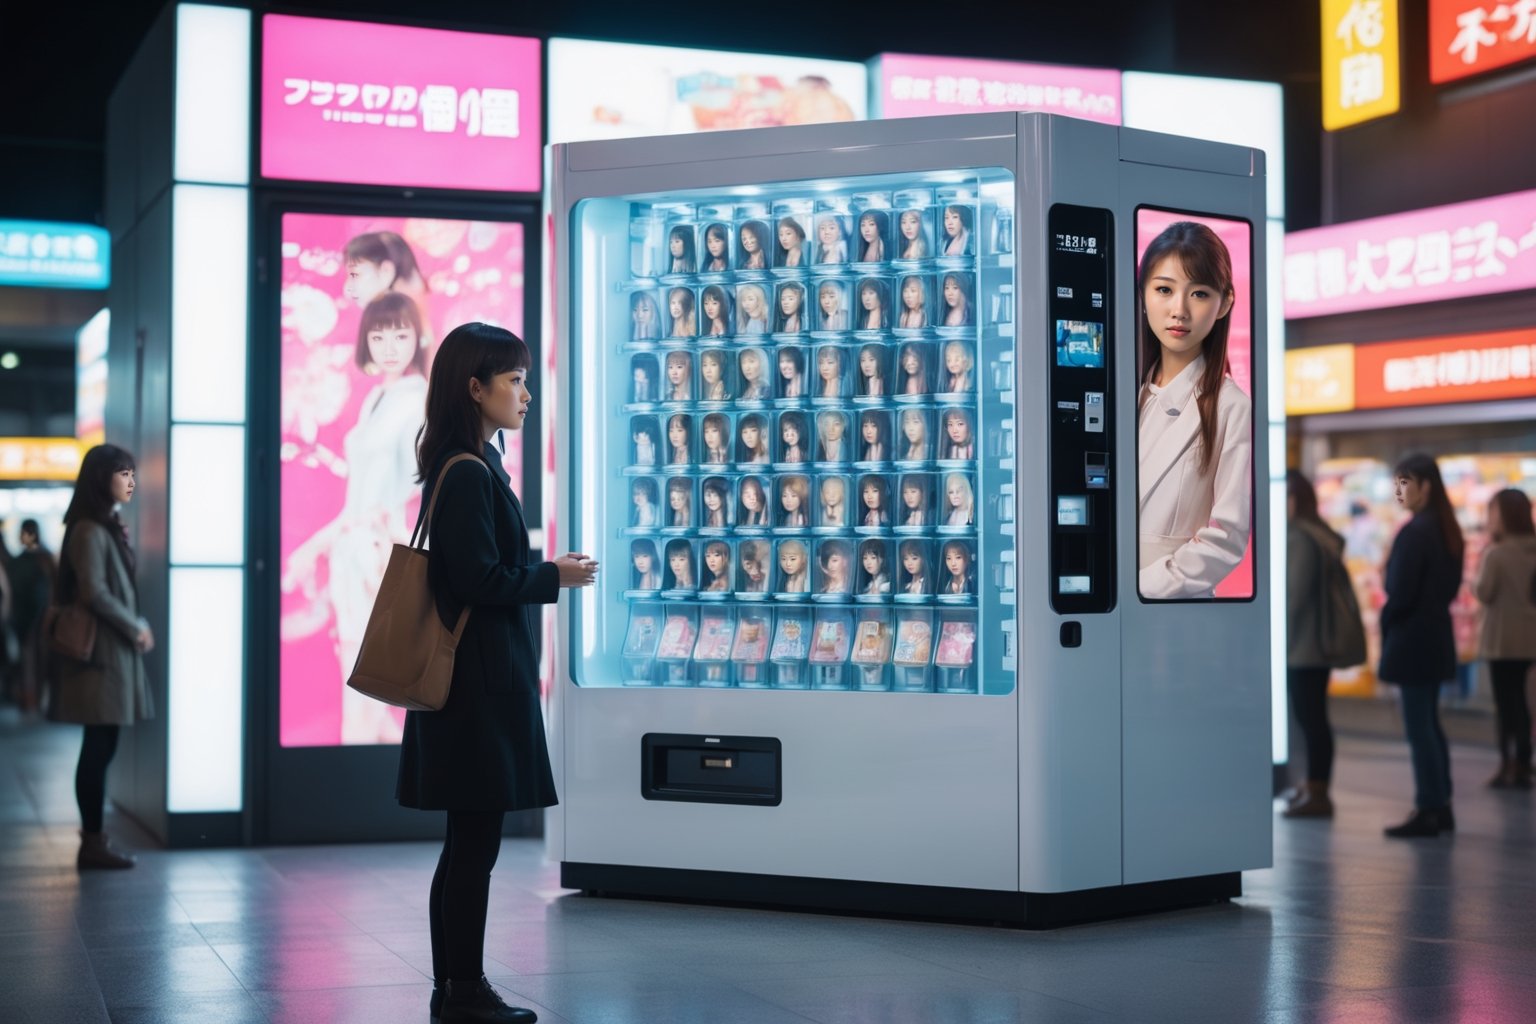 a young Japanese woman being sold from a futuristic, high-tech vending machine. The vending machine is filled with various female figures, each representing a different type of companion.